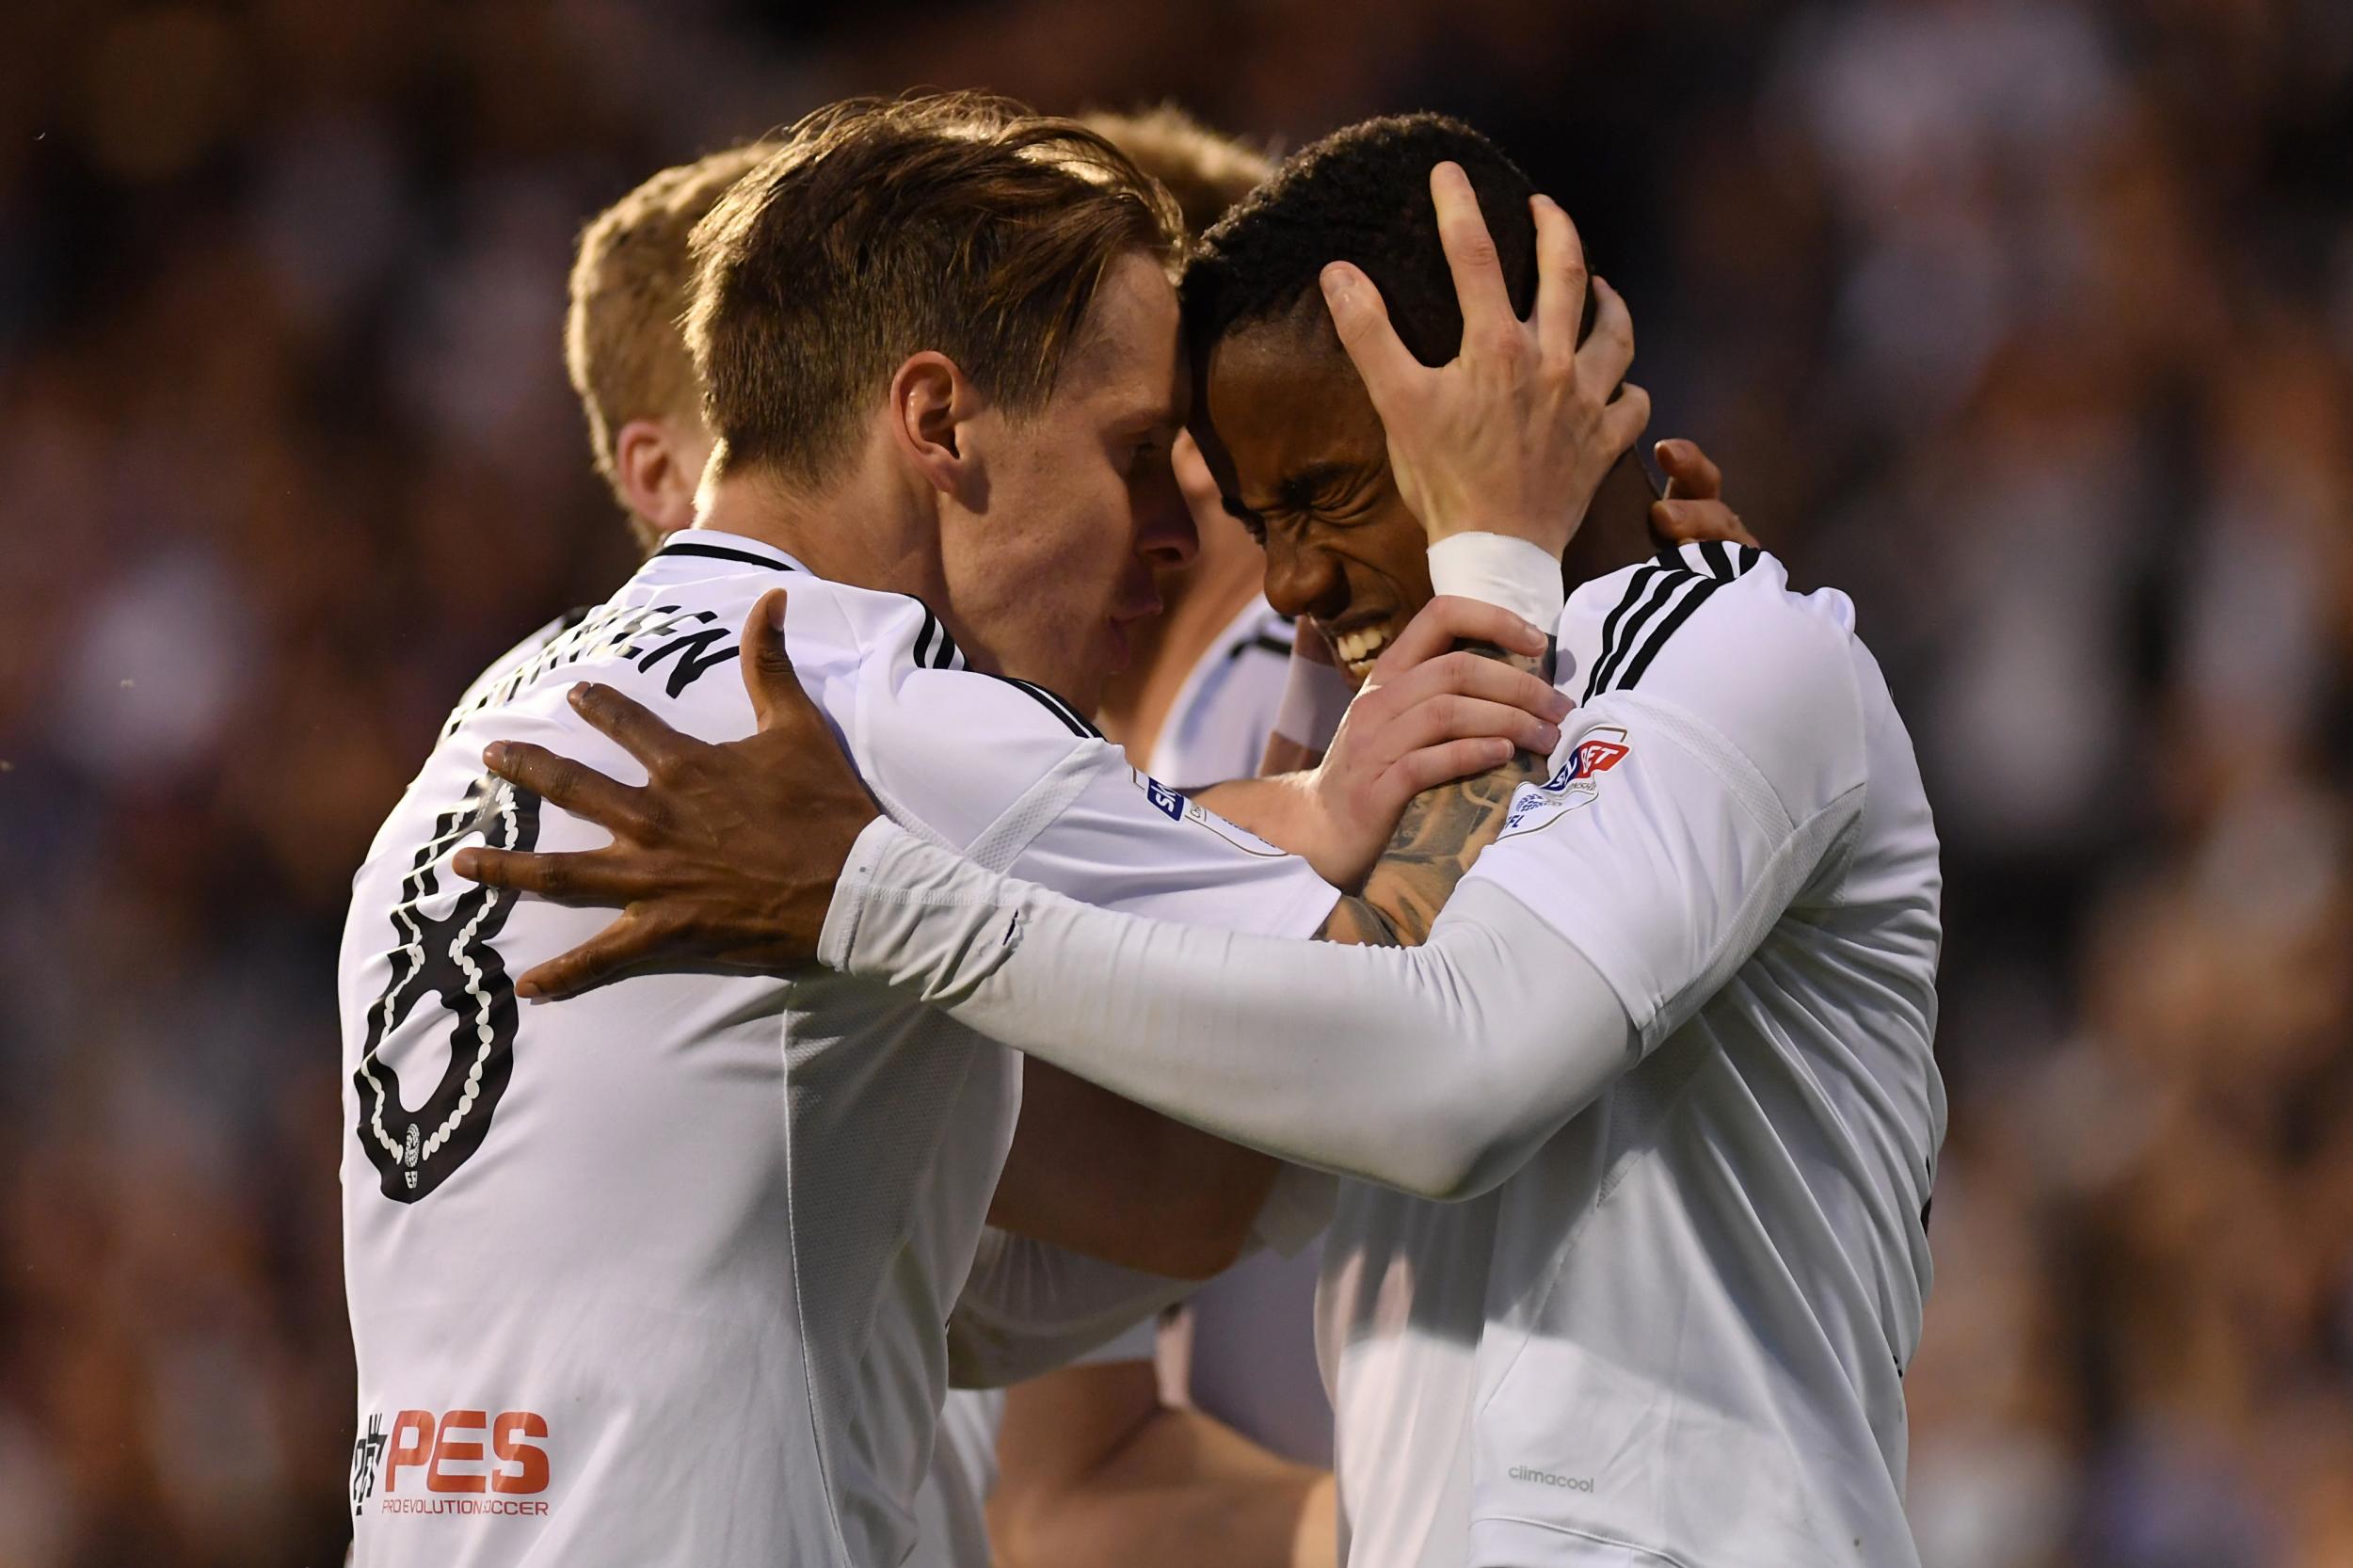 Fulham are the better side - but will it be enough?